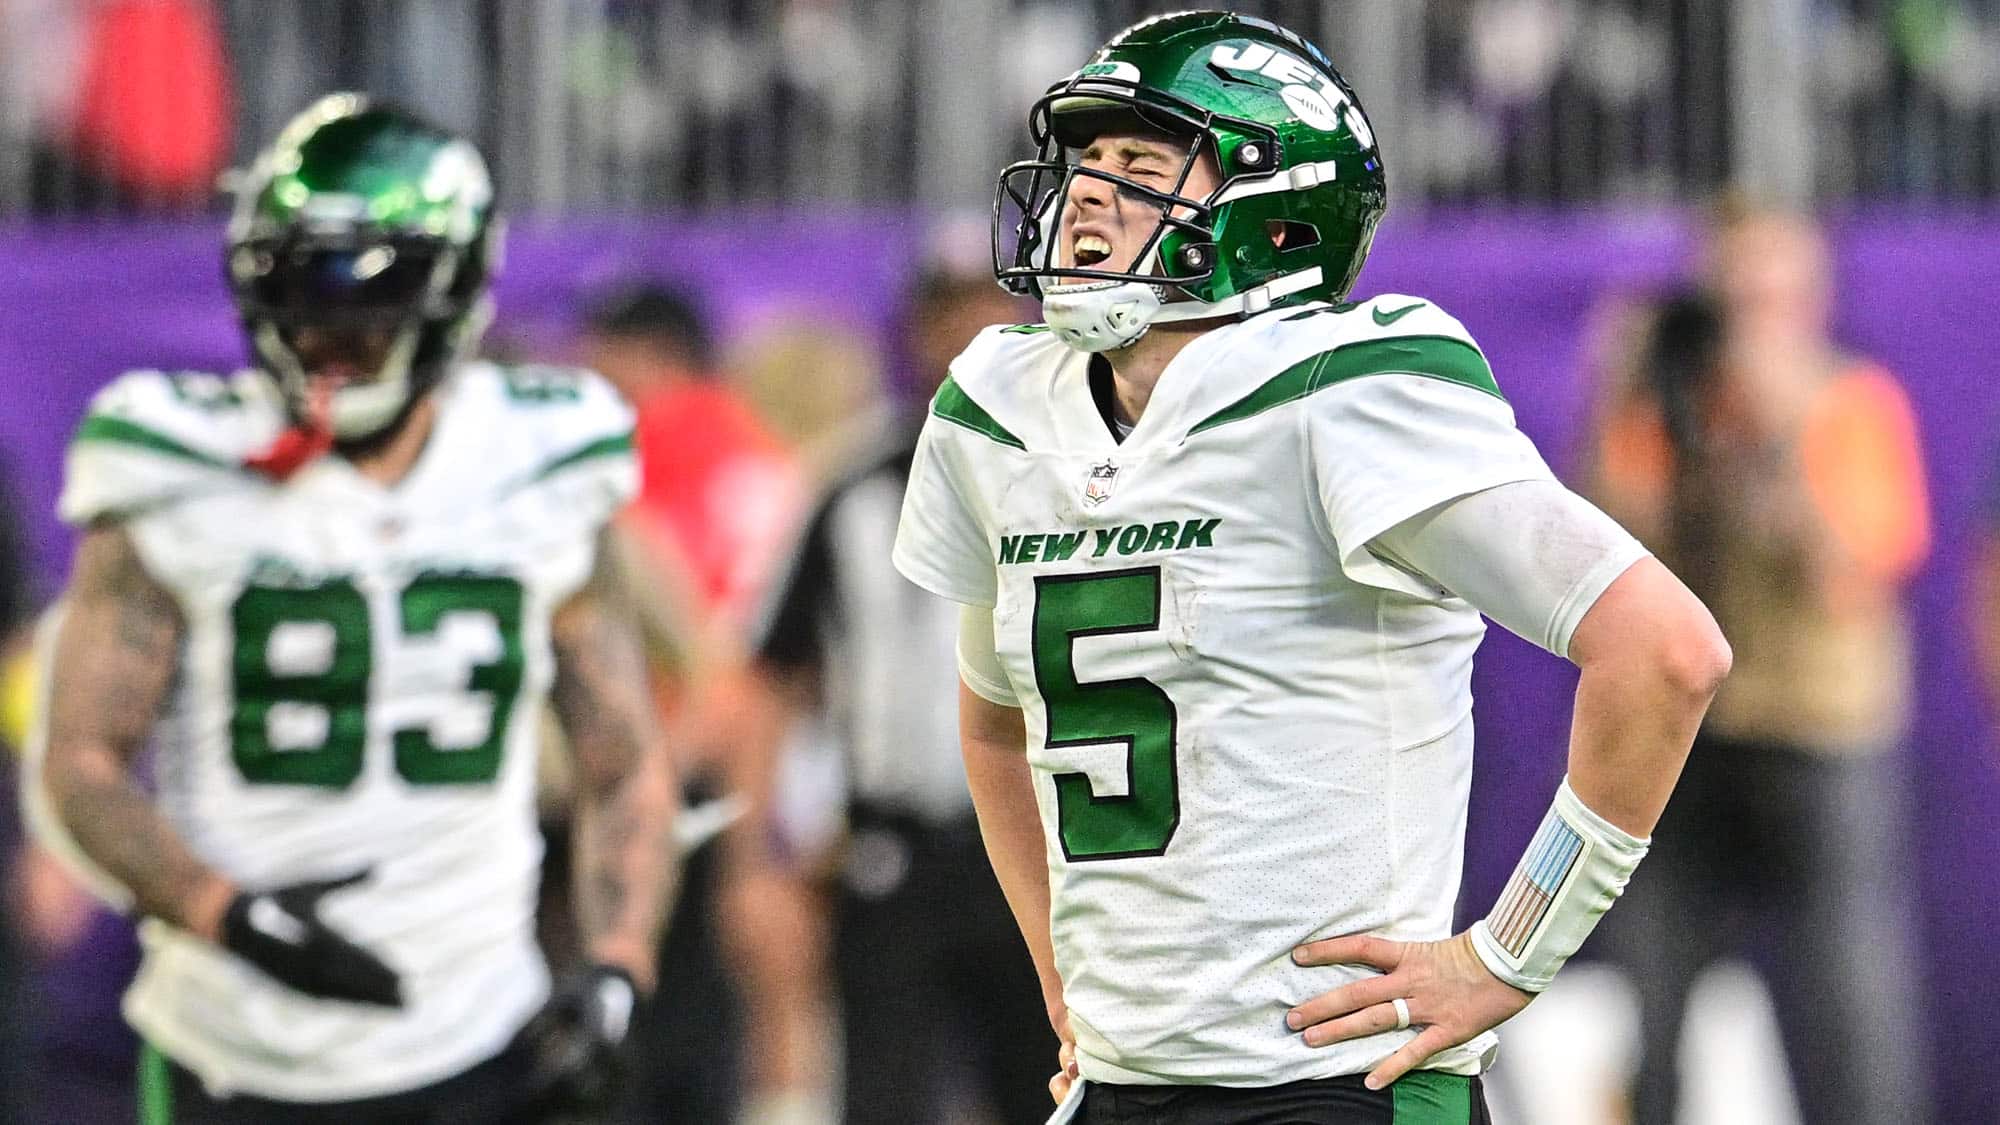 Jets' new uniforms not too bad in hindsight